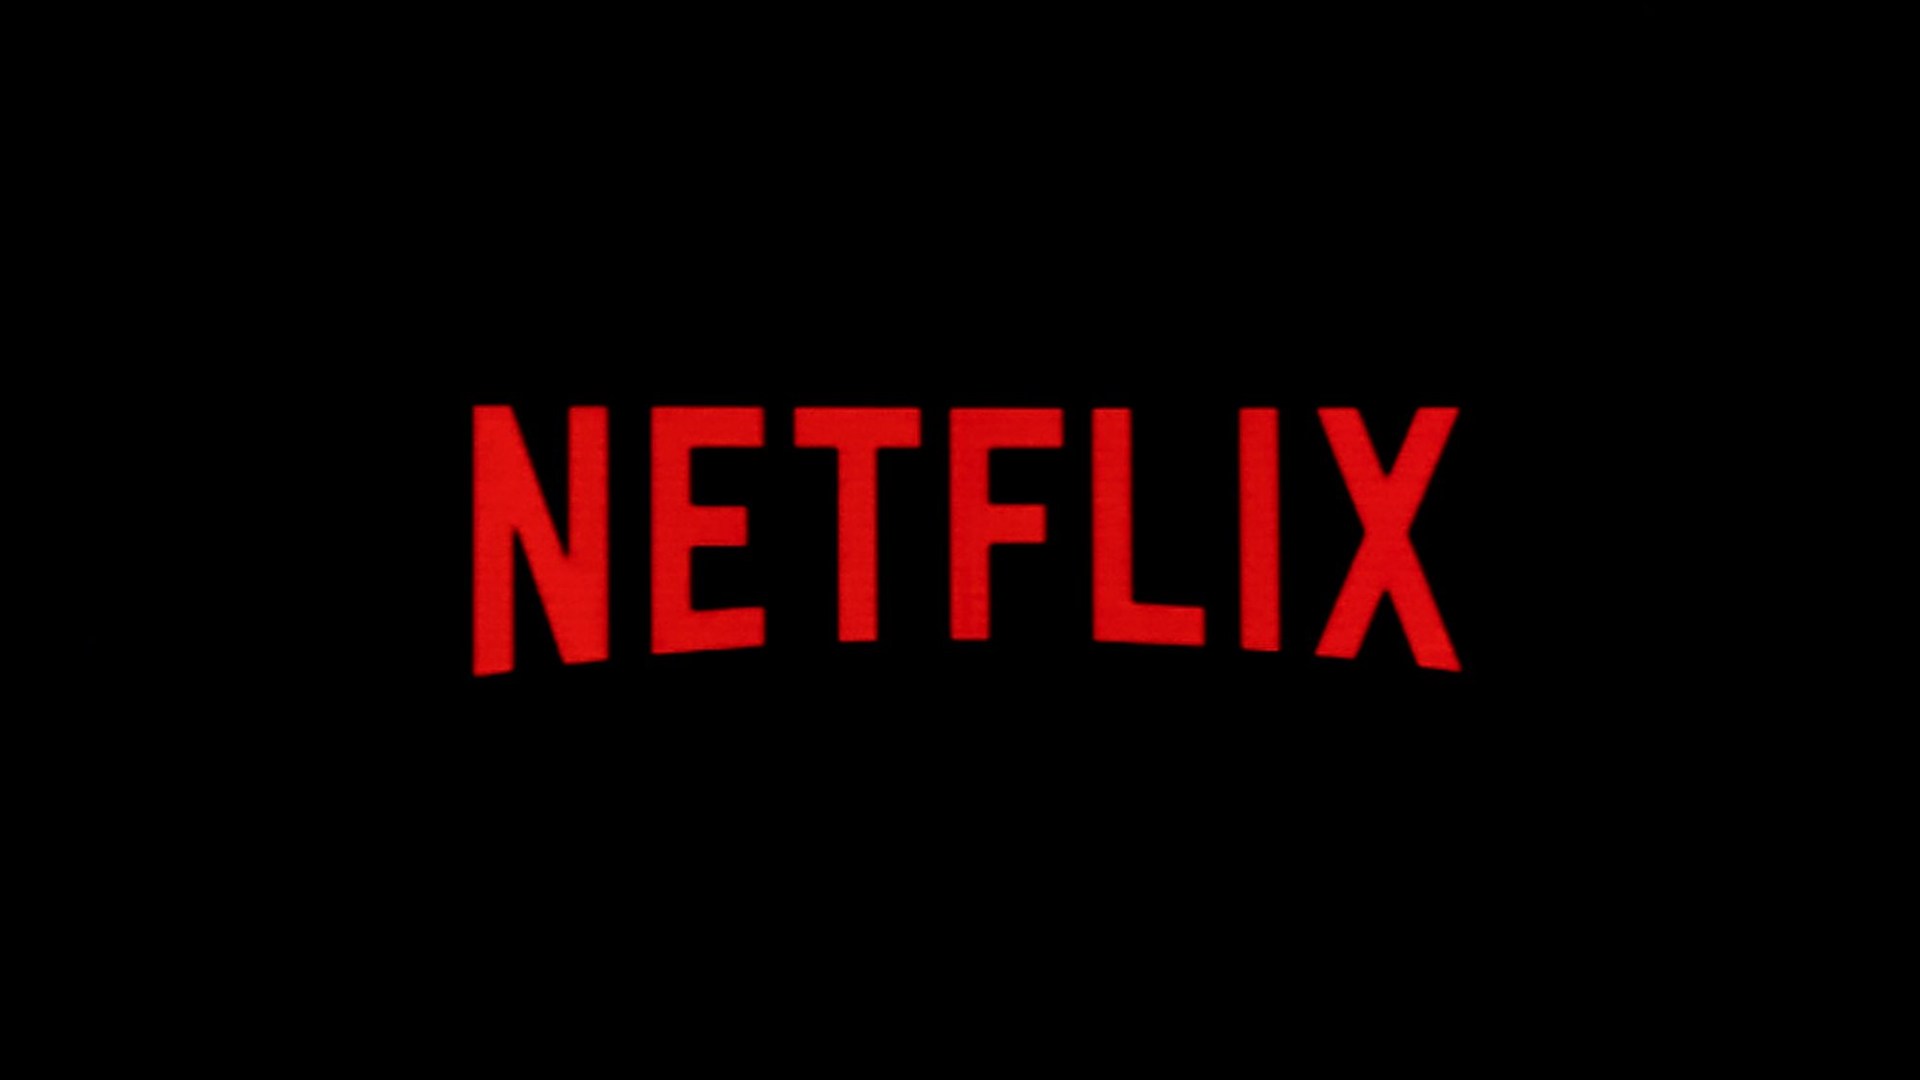 Netflix CEO’s Ambiguous Response to Apple Gadget Sparks Speculation – Find Out What Happens Next!